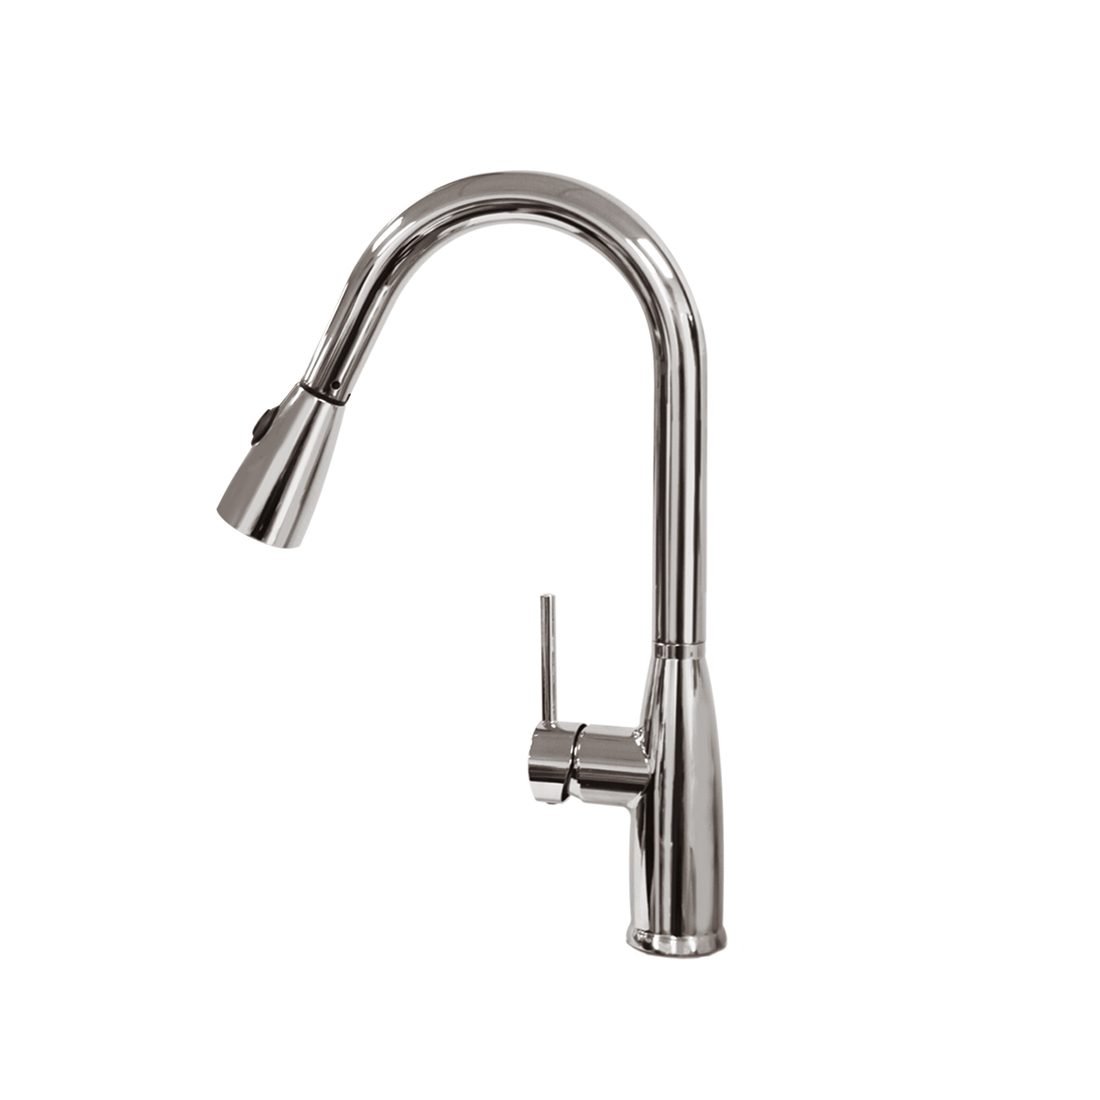 Berlin 36inch Laundry Cabinet Pull Down Chrome Faucet View